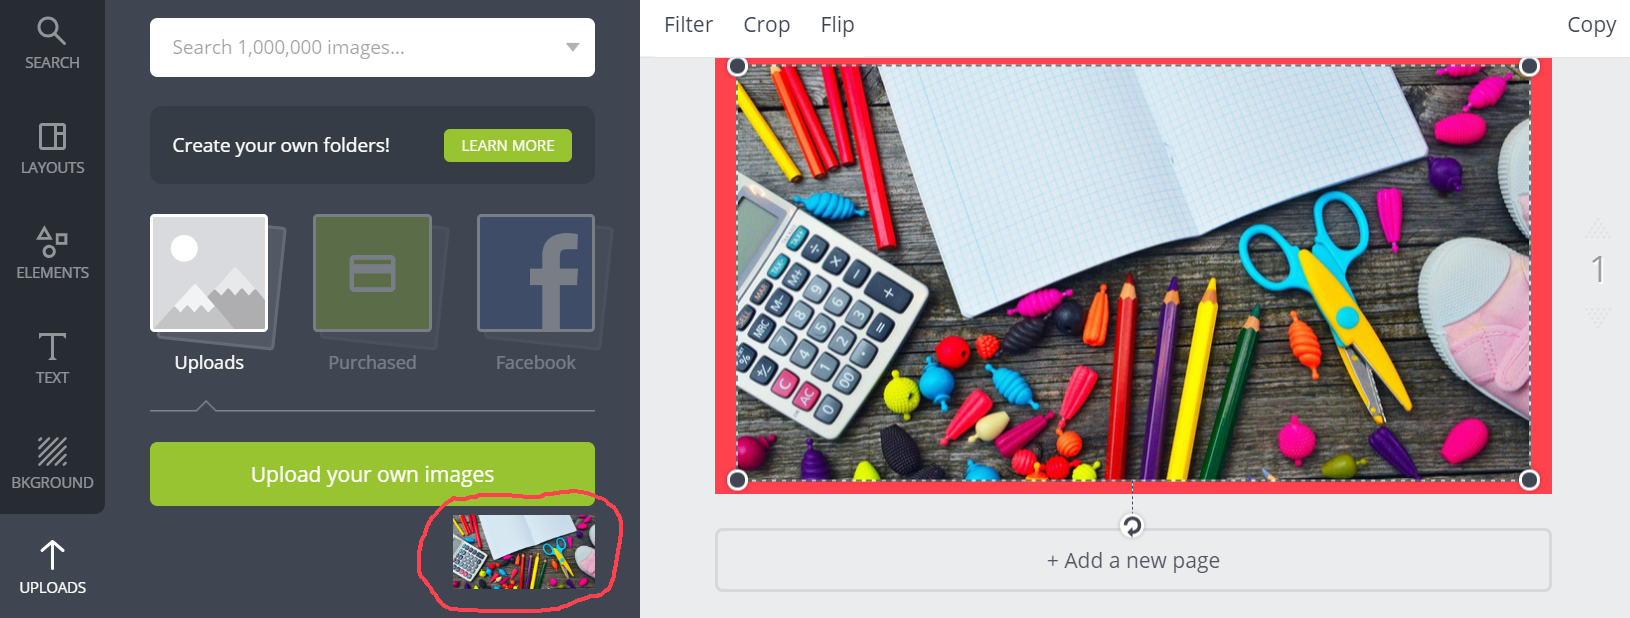 Create Featured Images - Step 5